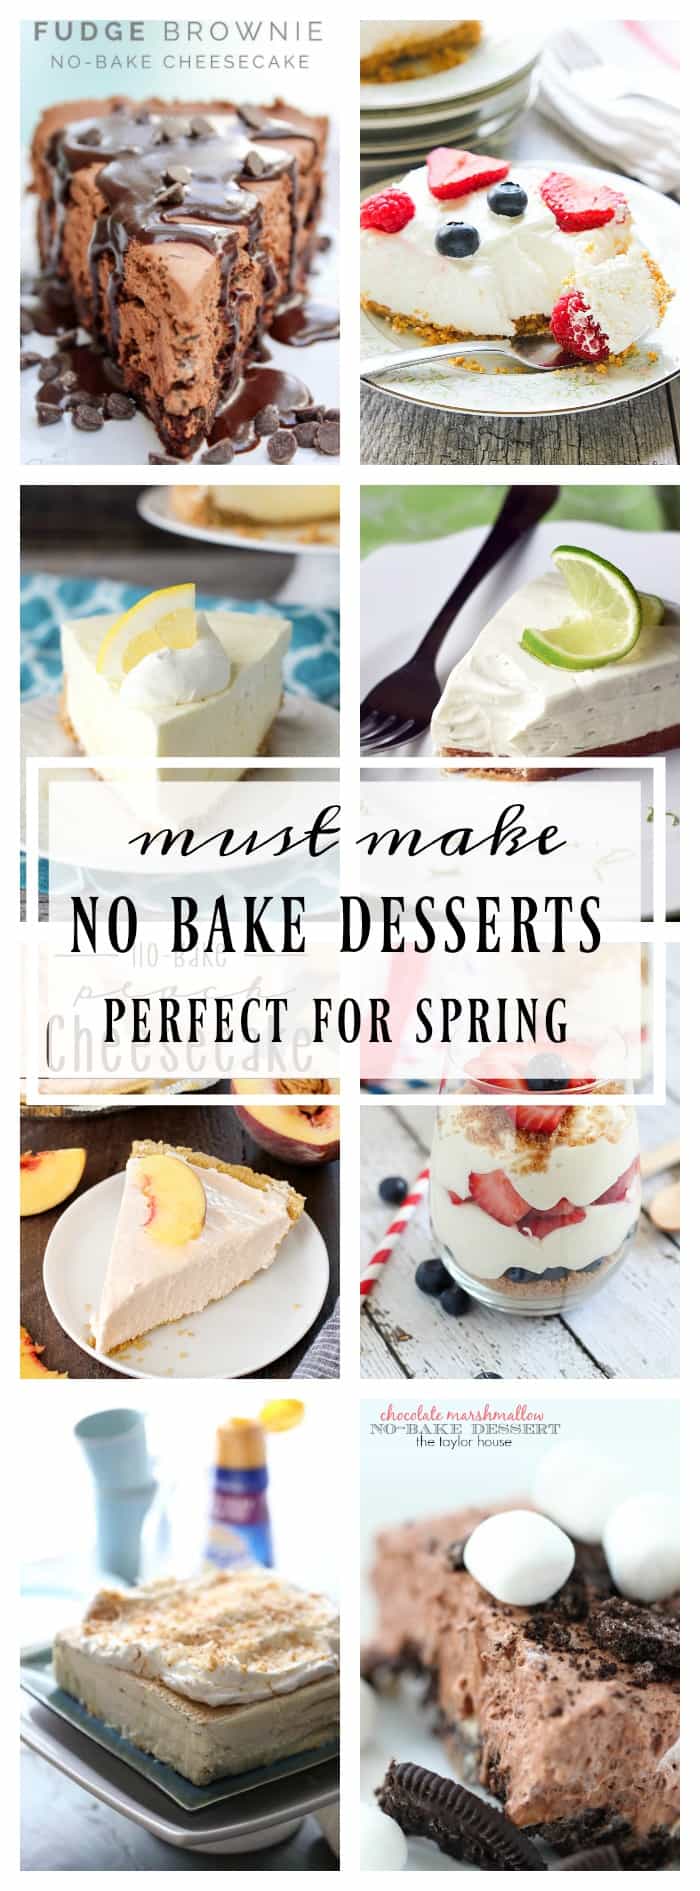 Warm weather is practically upon us, it's times to stock up on no bake recipes! 